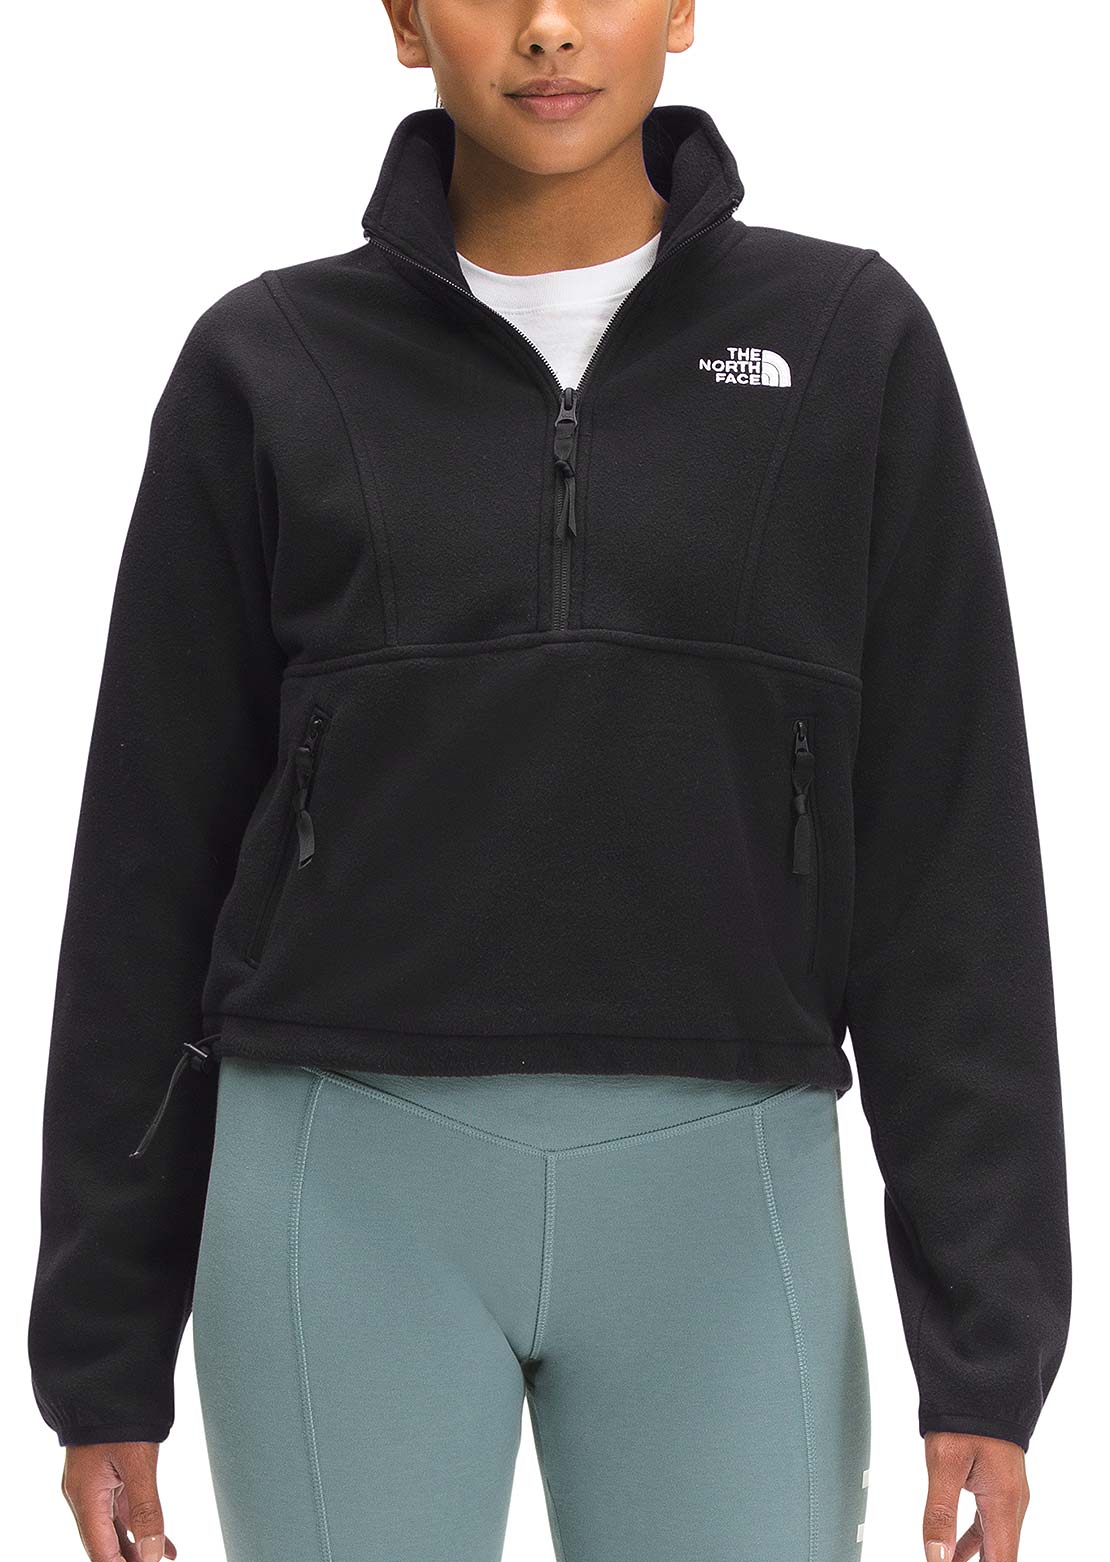 The North Face Women's Fleece Jackets & Pullovers